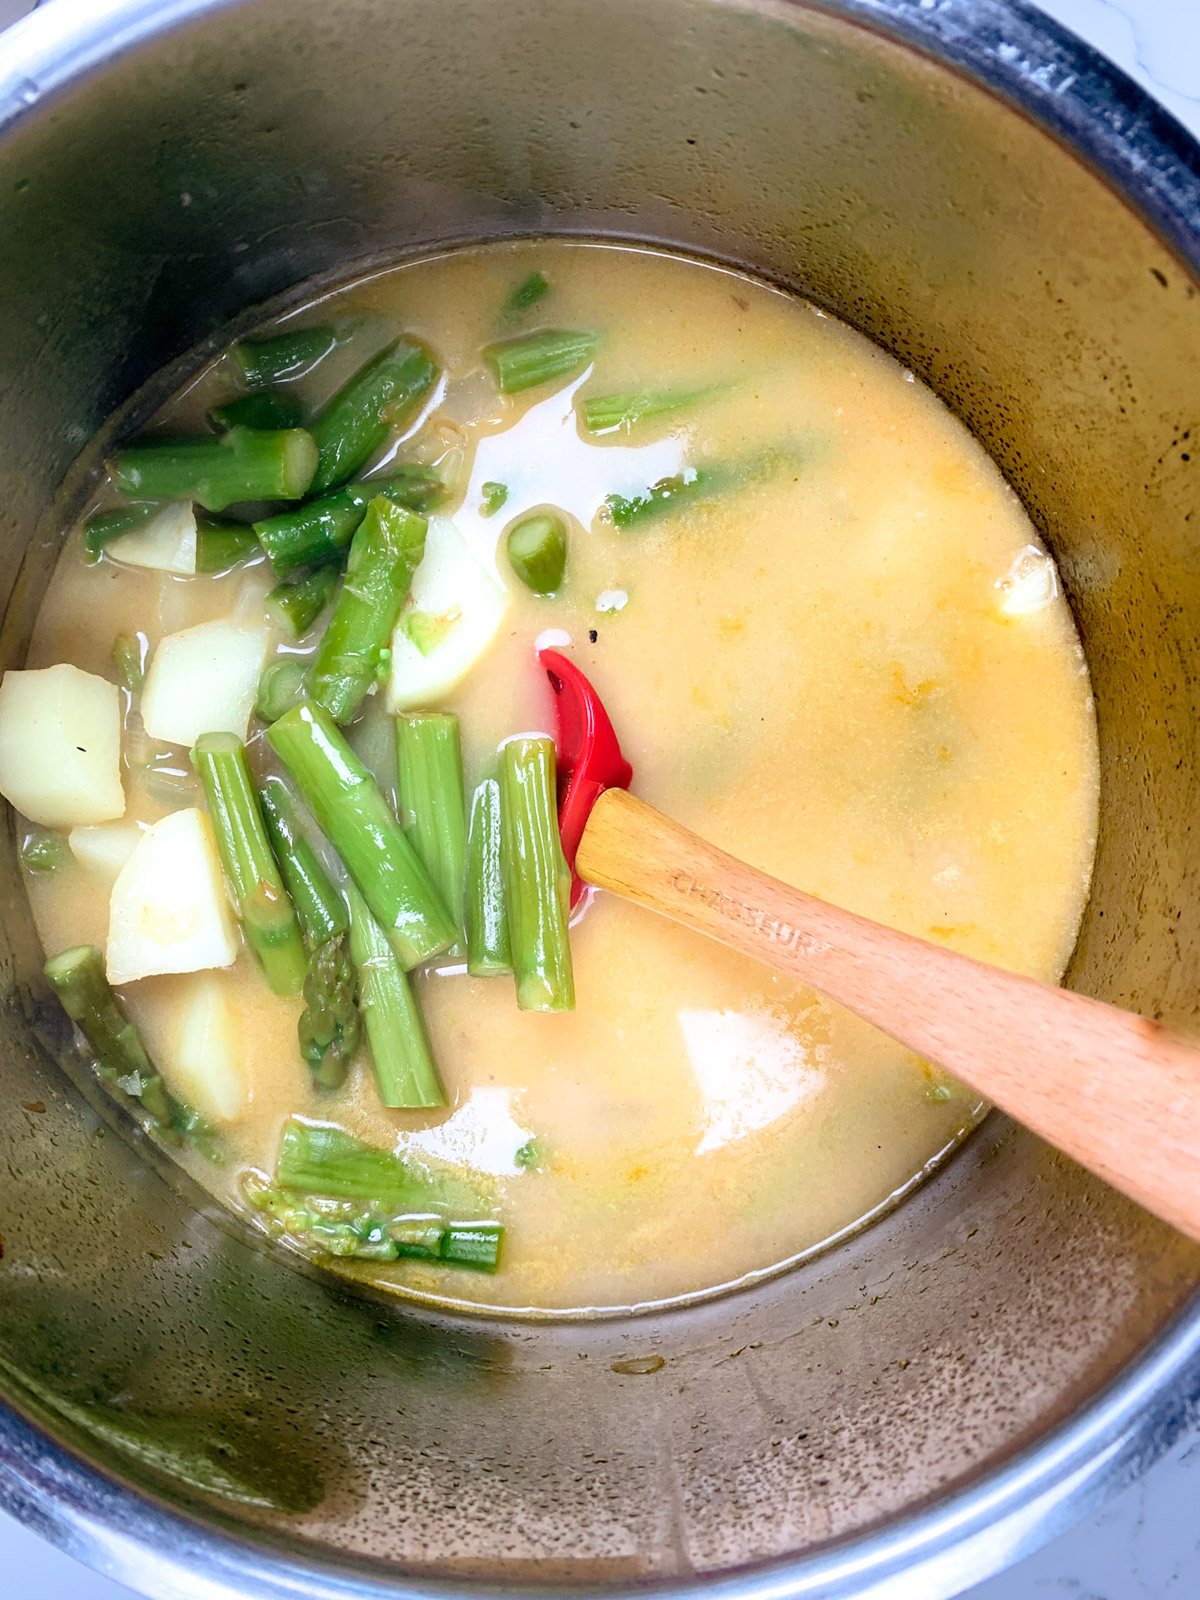 inside the pot looking at yellowish  soup with chopped asparagus and potatoes